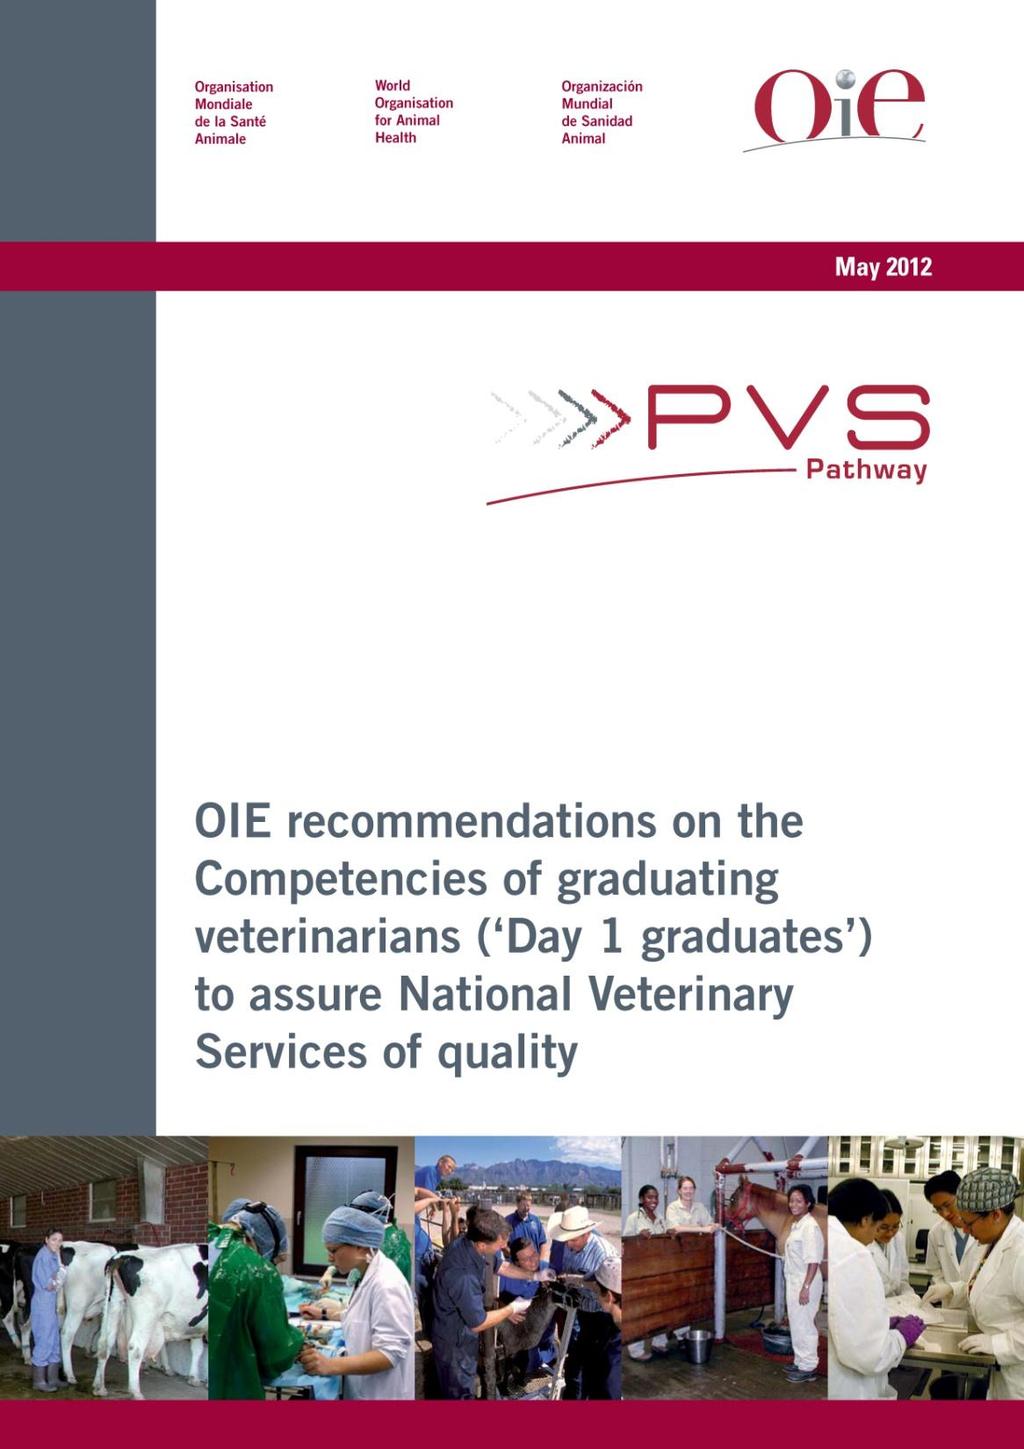 ...High quality veterinary education is of critical importance to efficient Veterinary Services and improving the